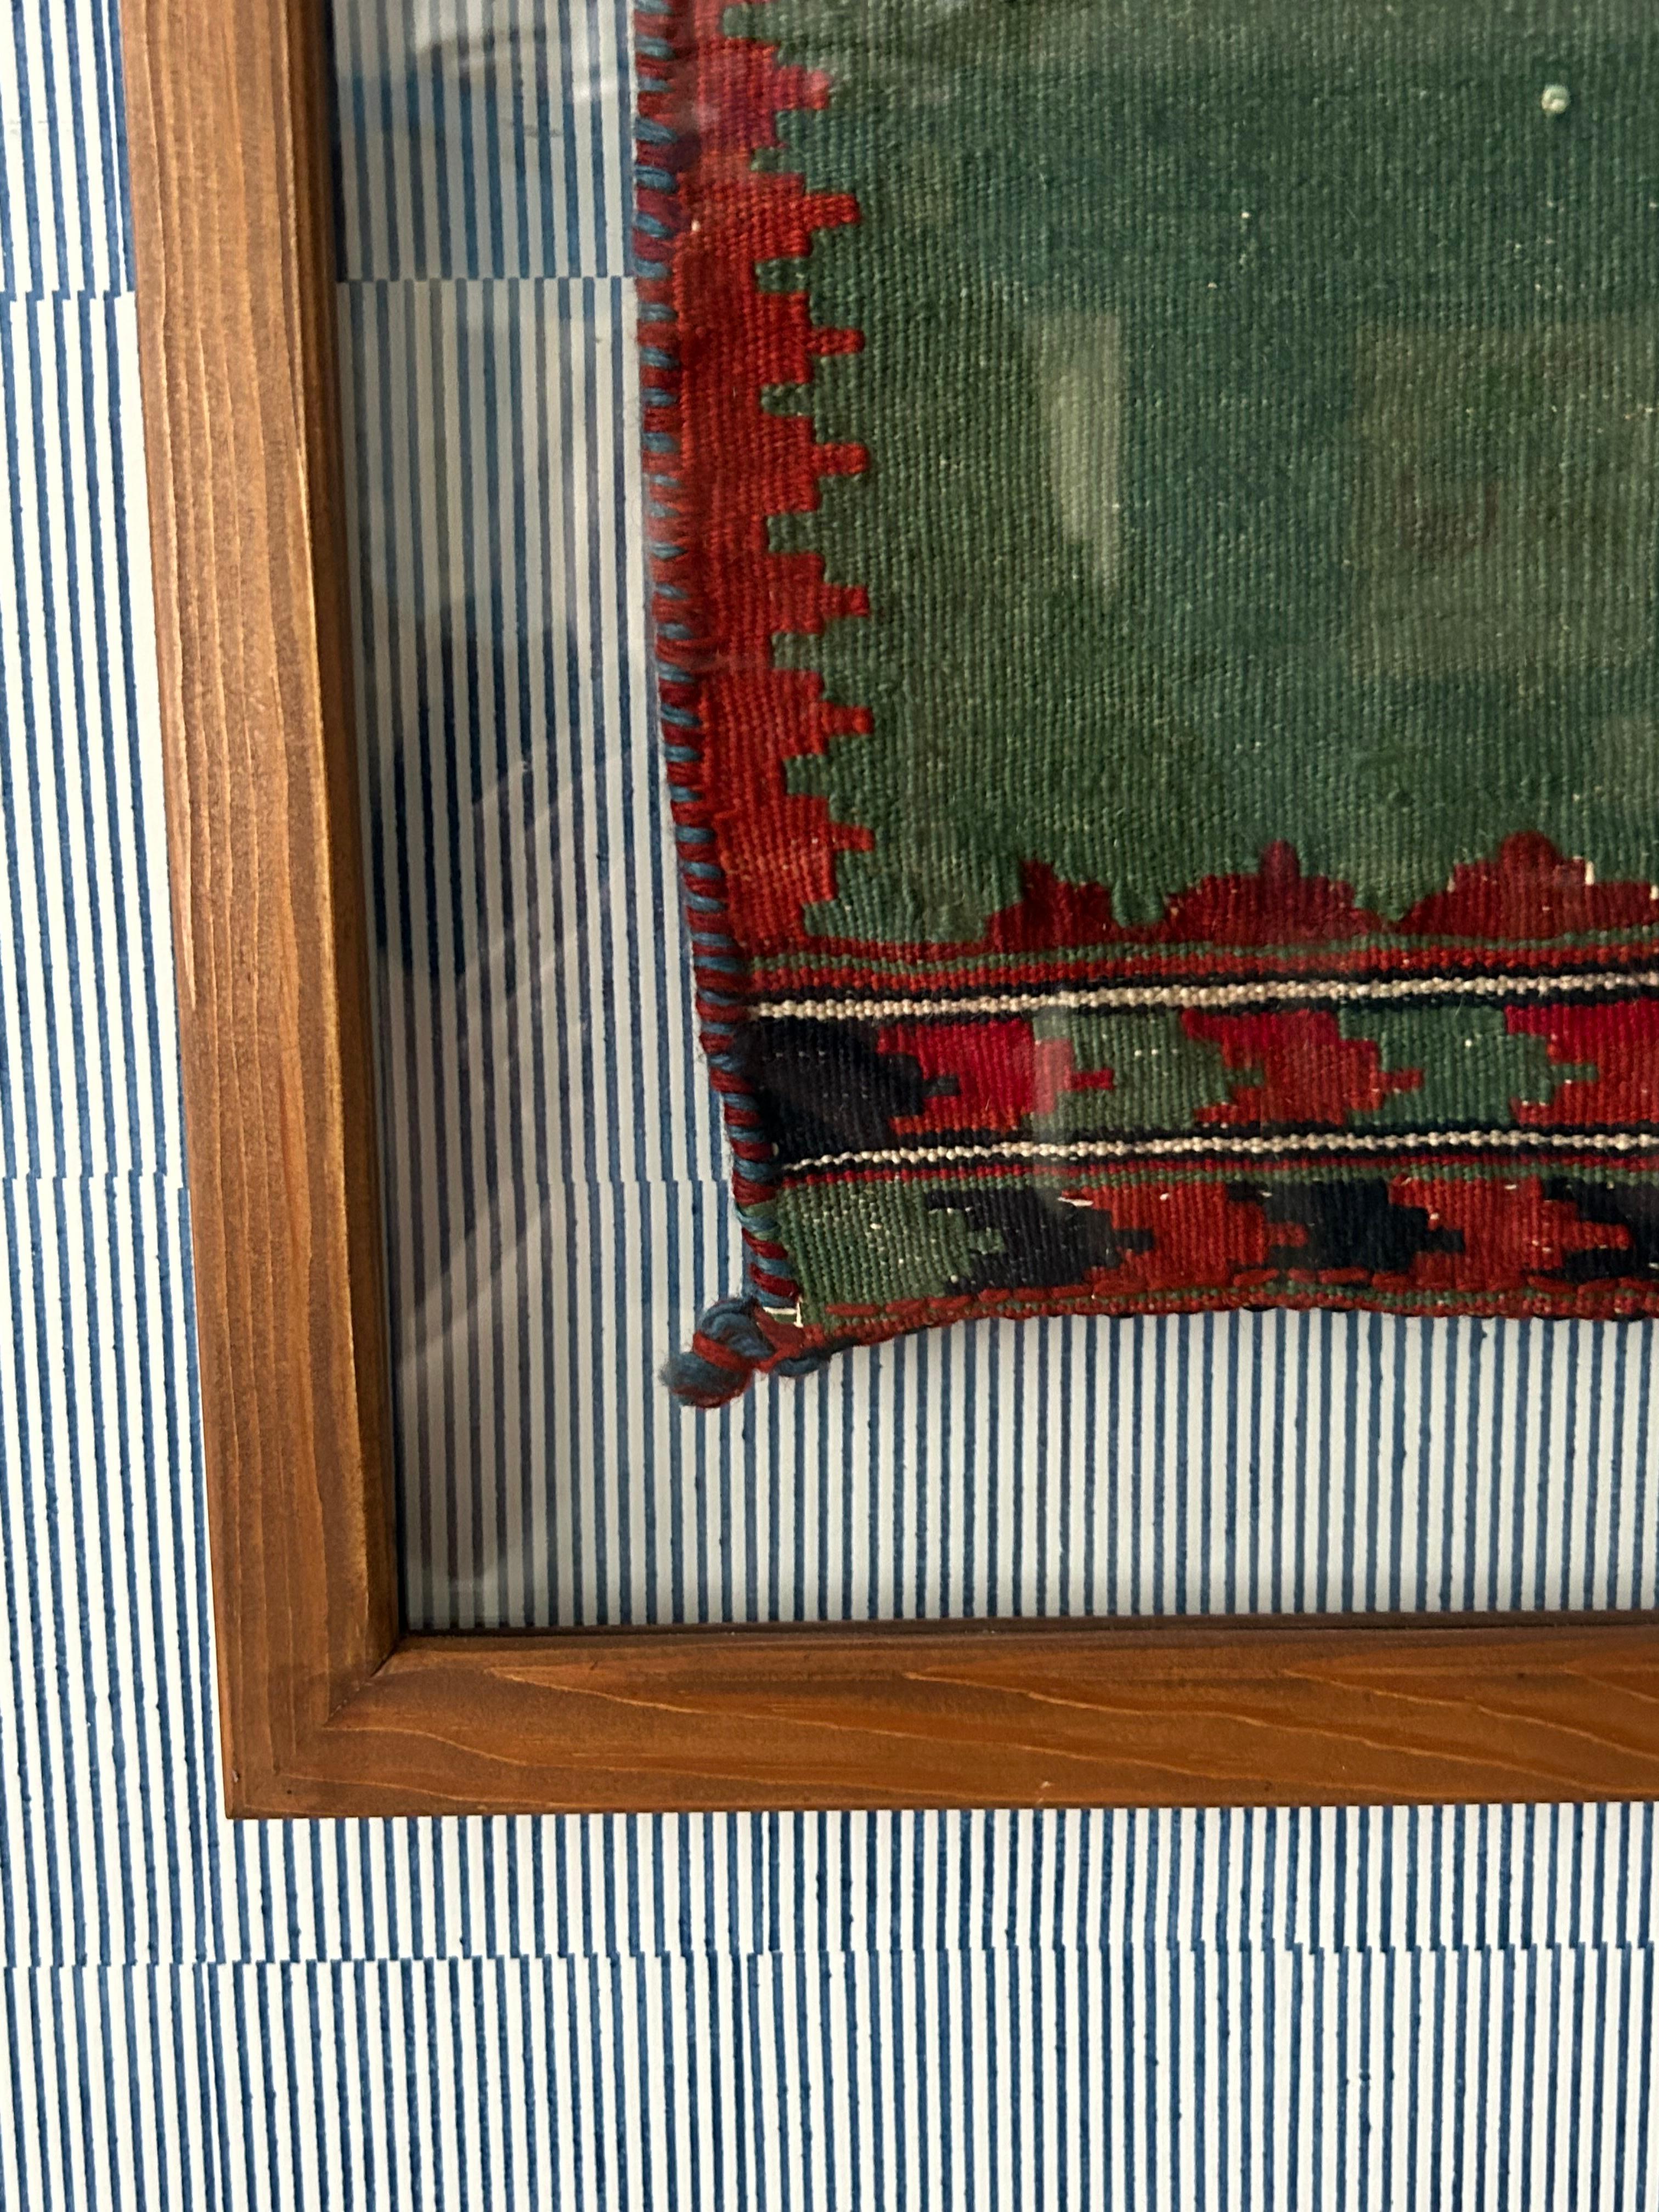 Wool Vintage Framed Kashgai Kelim Rug in Green and Red, West Asia, 20th Century For Sale